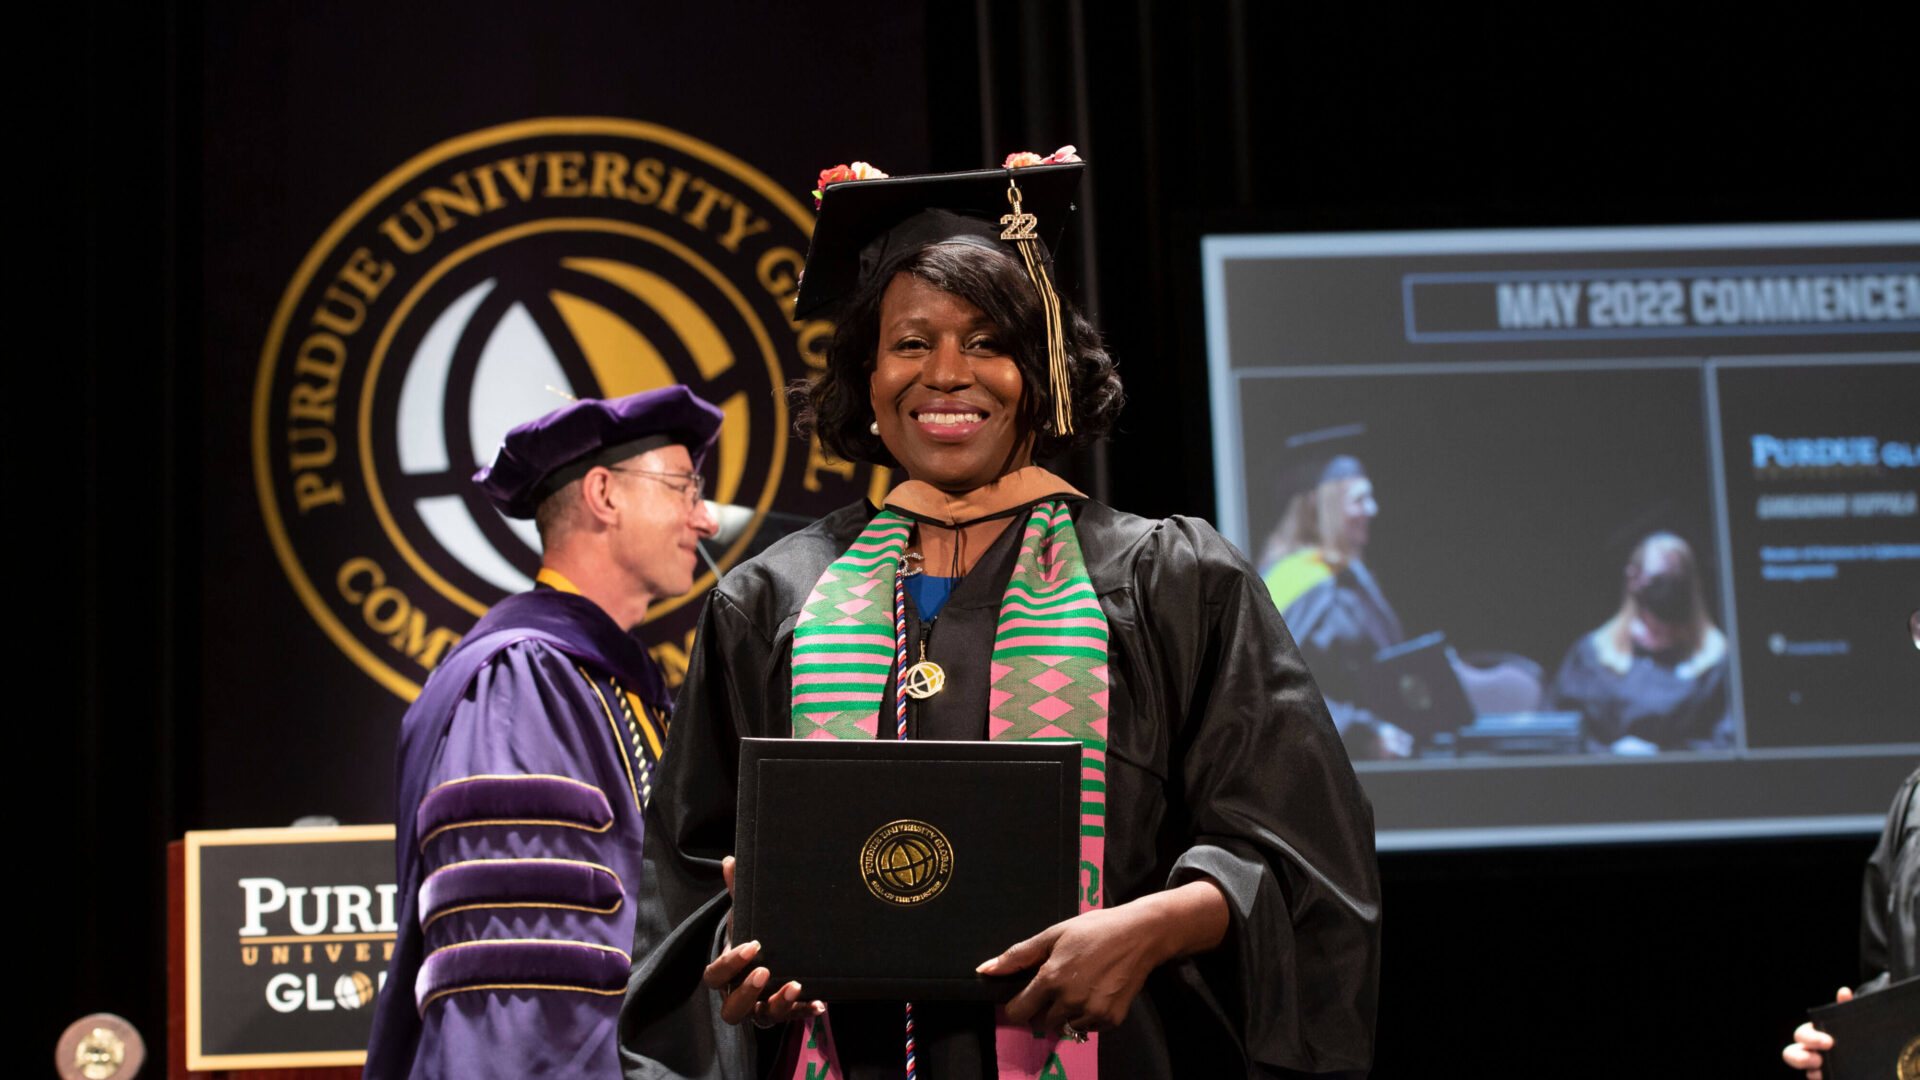 Sheila Taylor holds her Purdue University Global diploma.